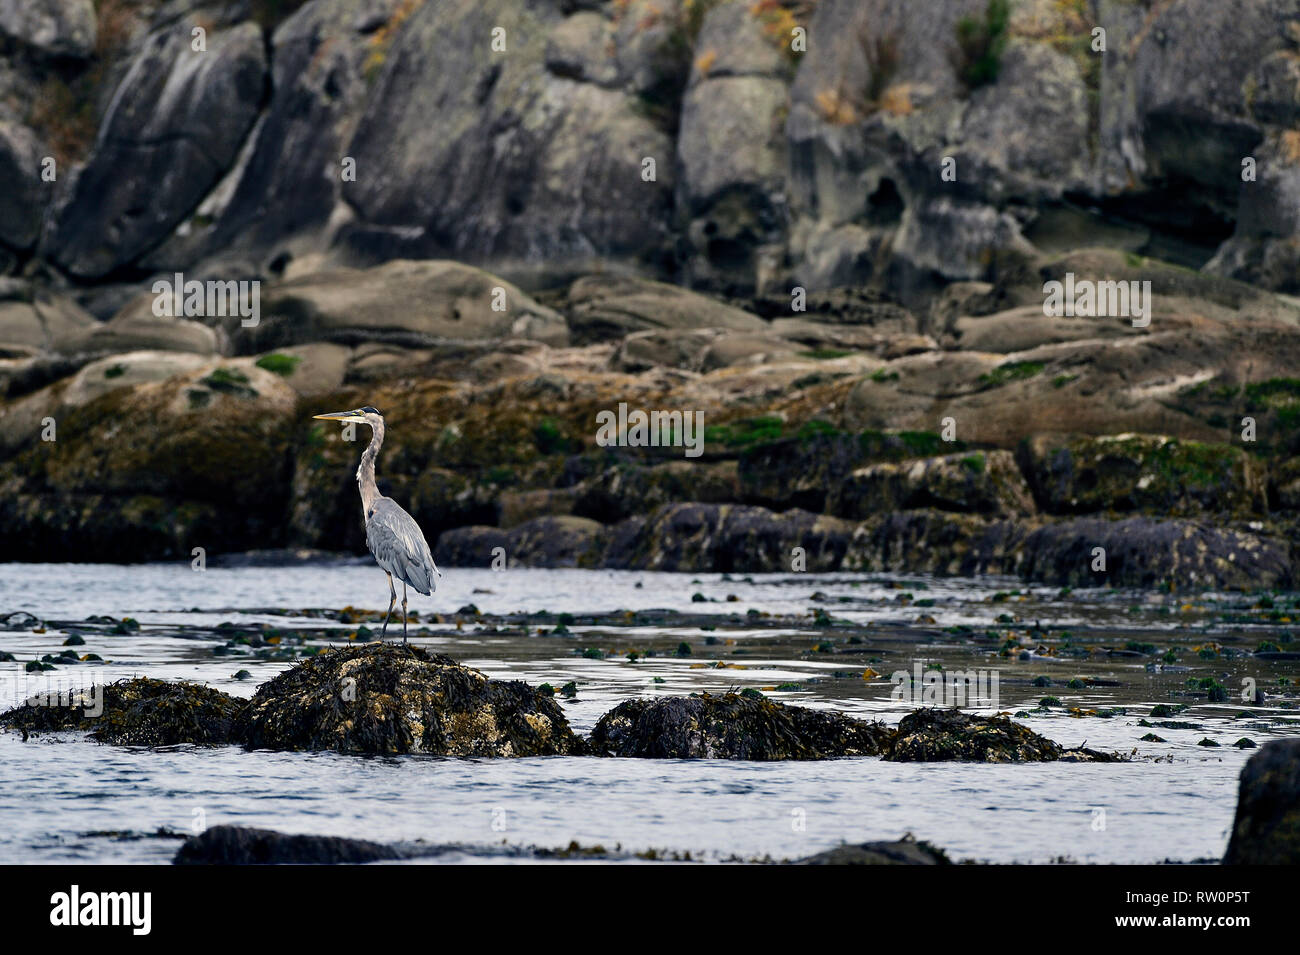 A wild Great Blue Heron 'Ardea herodias', perched on a rock along a rocky shore on Vancouver Island British Columbia Canada. Stock Photo